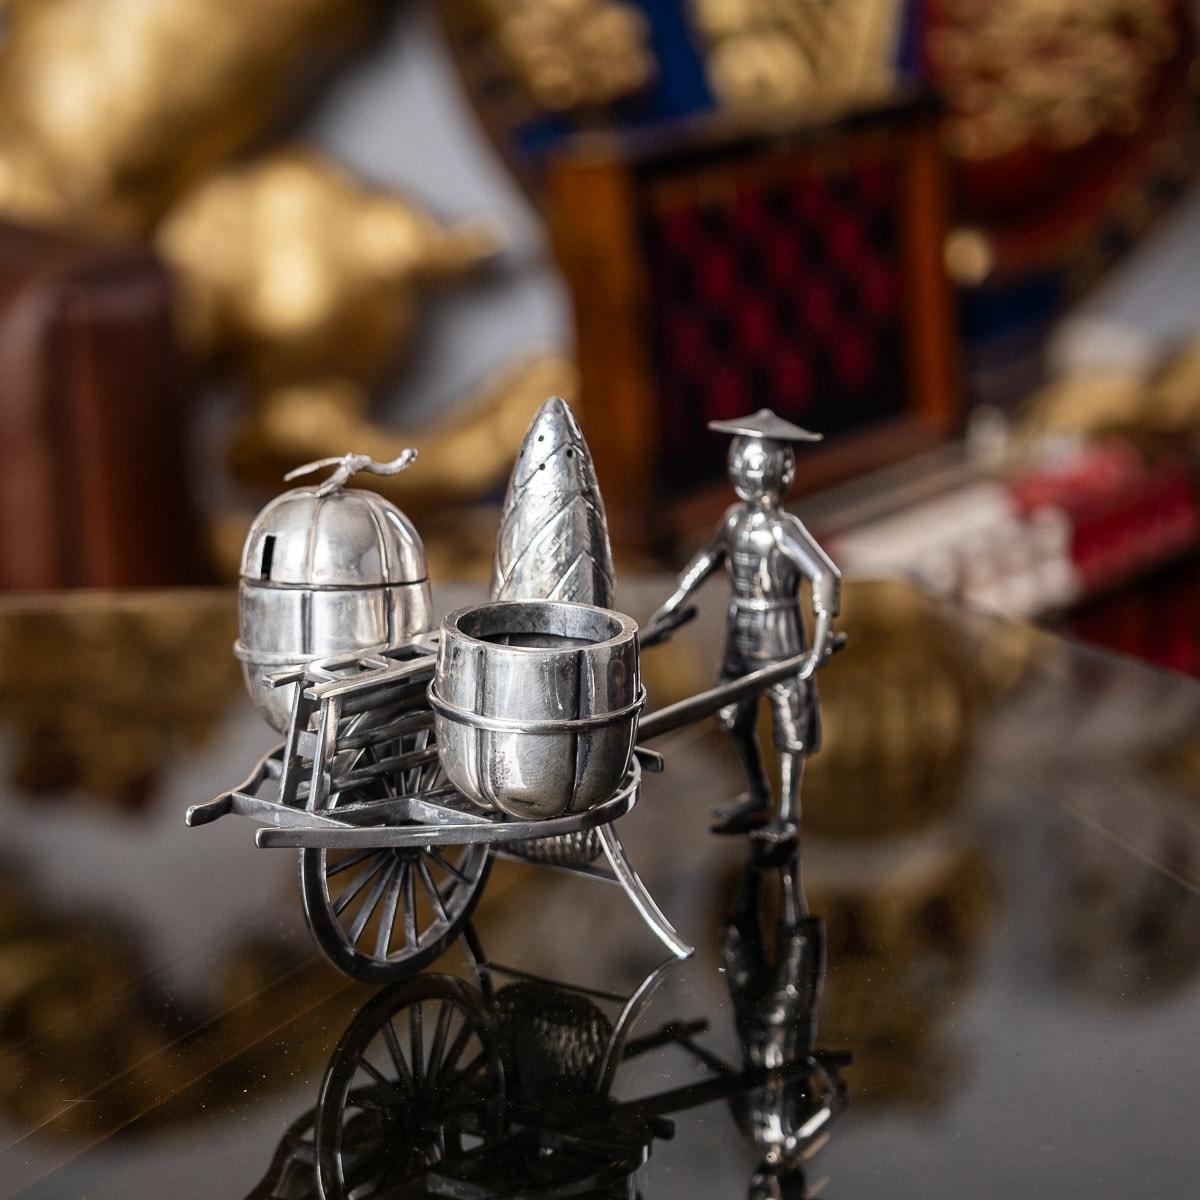 Antique early 20th Century Chinese novelty solid silver condiment set, comprising a pepperette, salt and mustard pot, fitted in a traders pushcart. Hallmarked Chinese Export Silver, Maker's mark for Nobuki.

CONDITION
In Great Condition - No